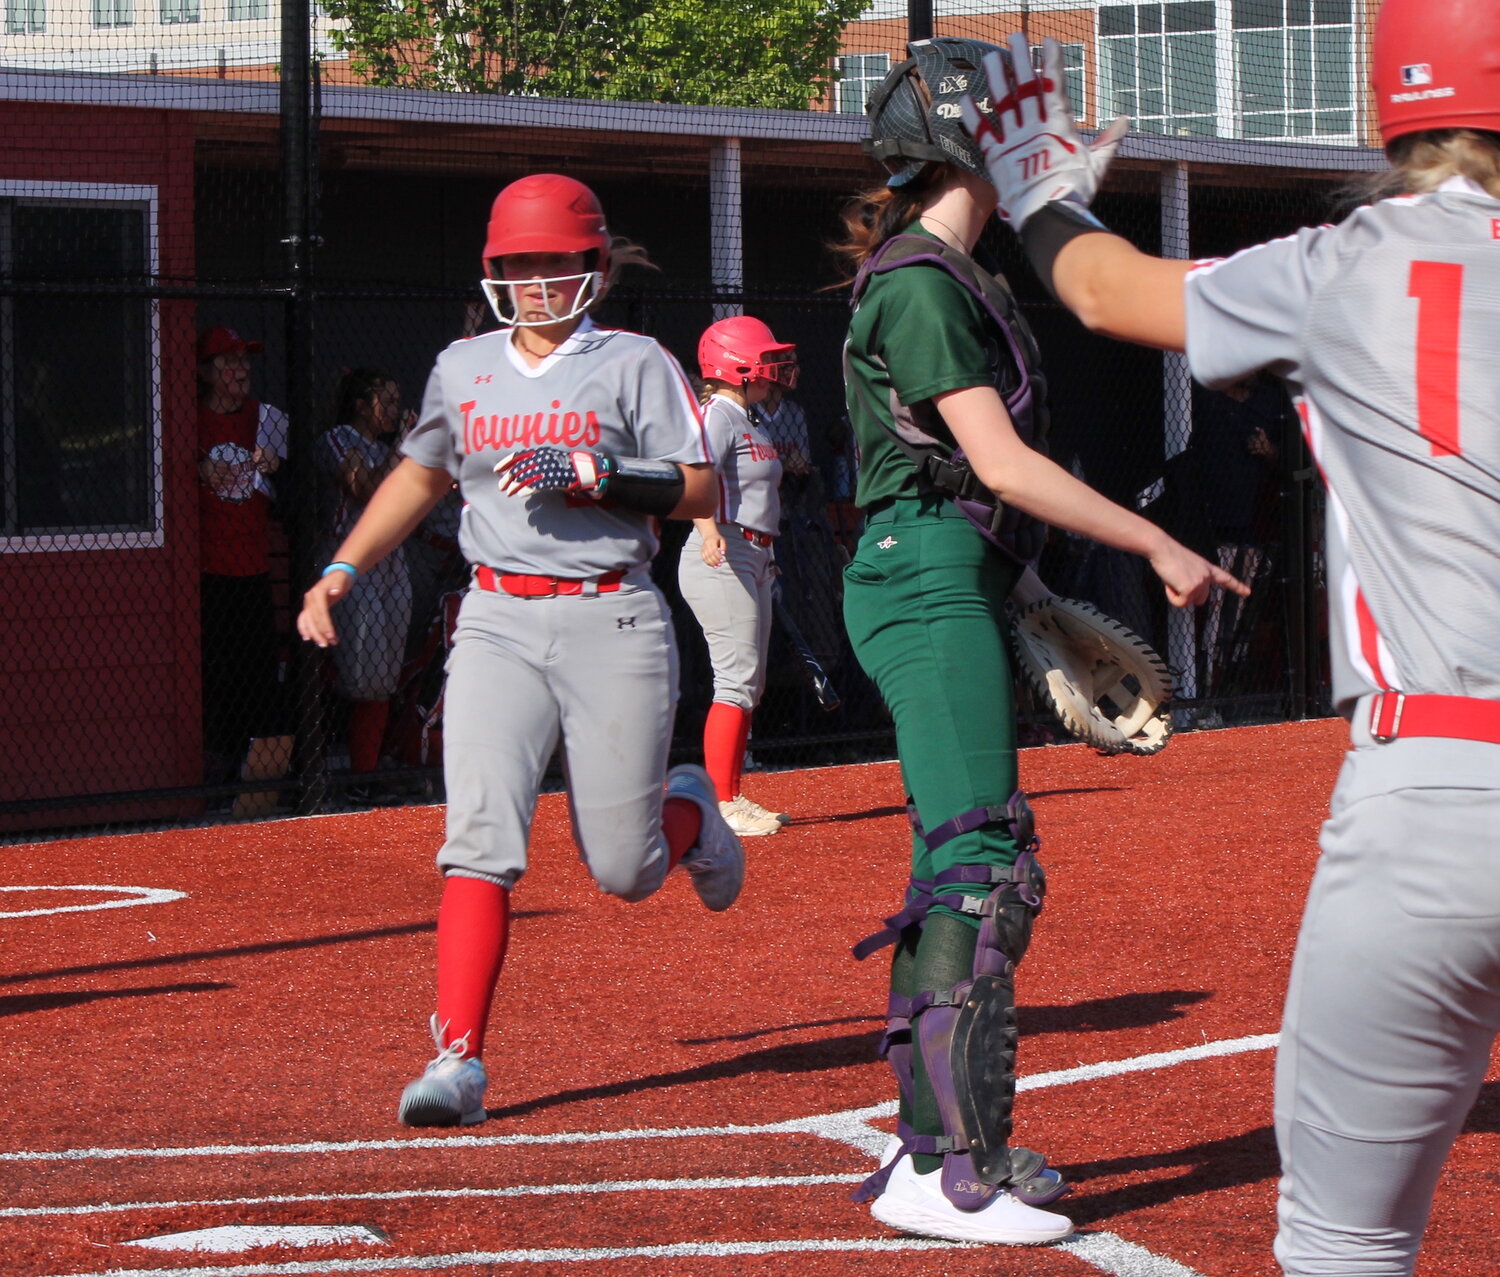 EP's Emma Boisseau crosses the plate with the second and eventual game-winning run after Emma Bergeron tripled in the bottom of the sixth inning.